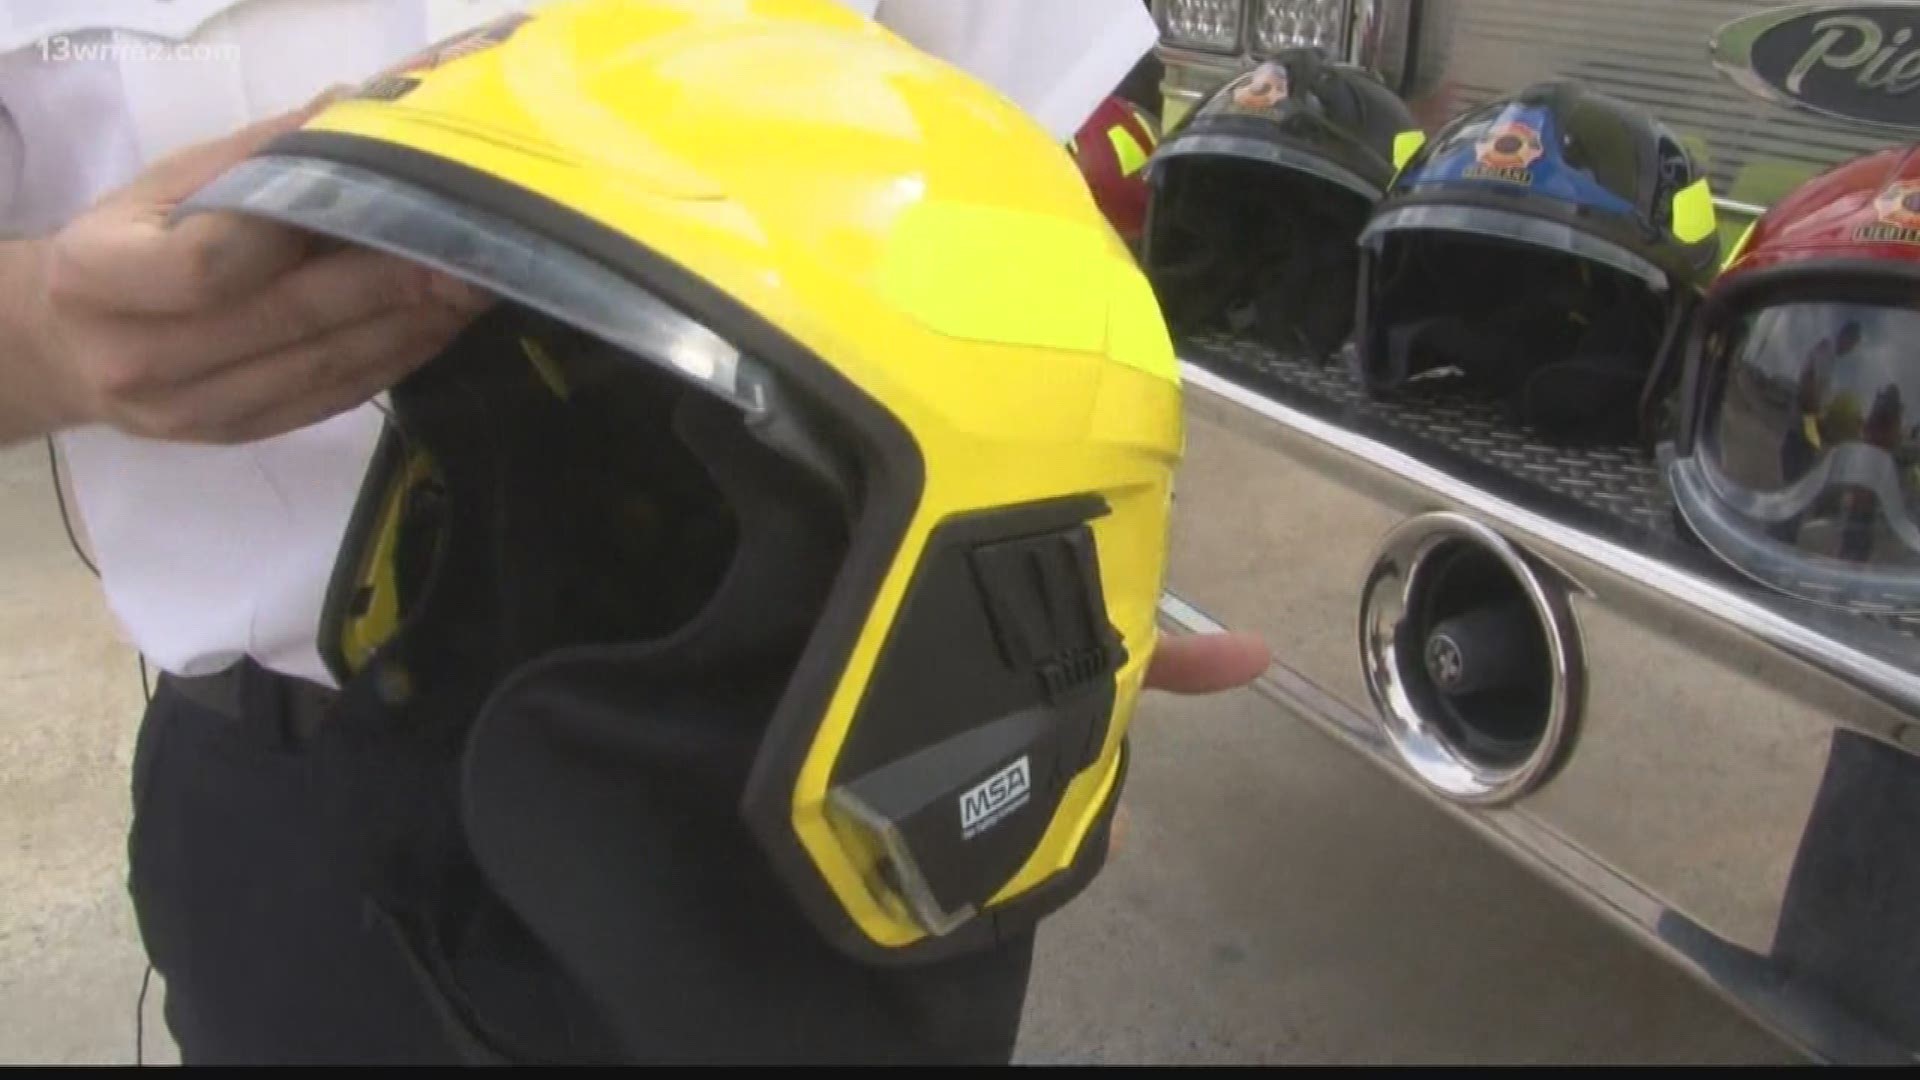 The City of Gray Fire Department now has a new piece of gear it says will improve safety and efficiency. Courteney Jacobazzi gives you a look at the new helmets.